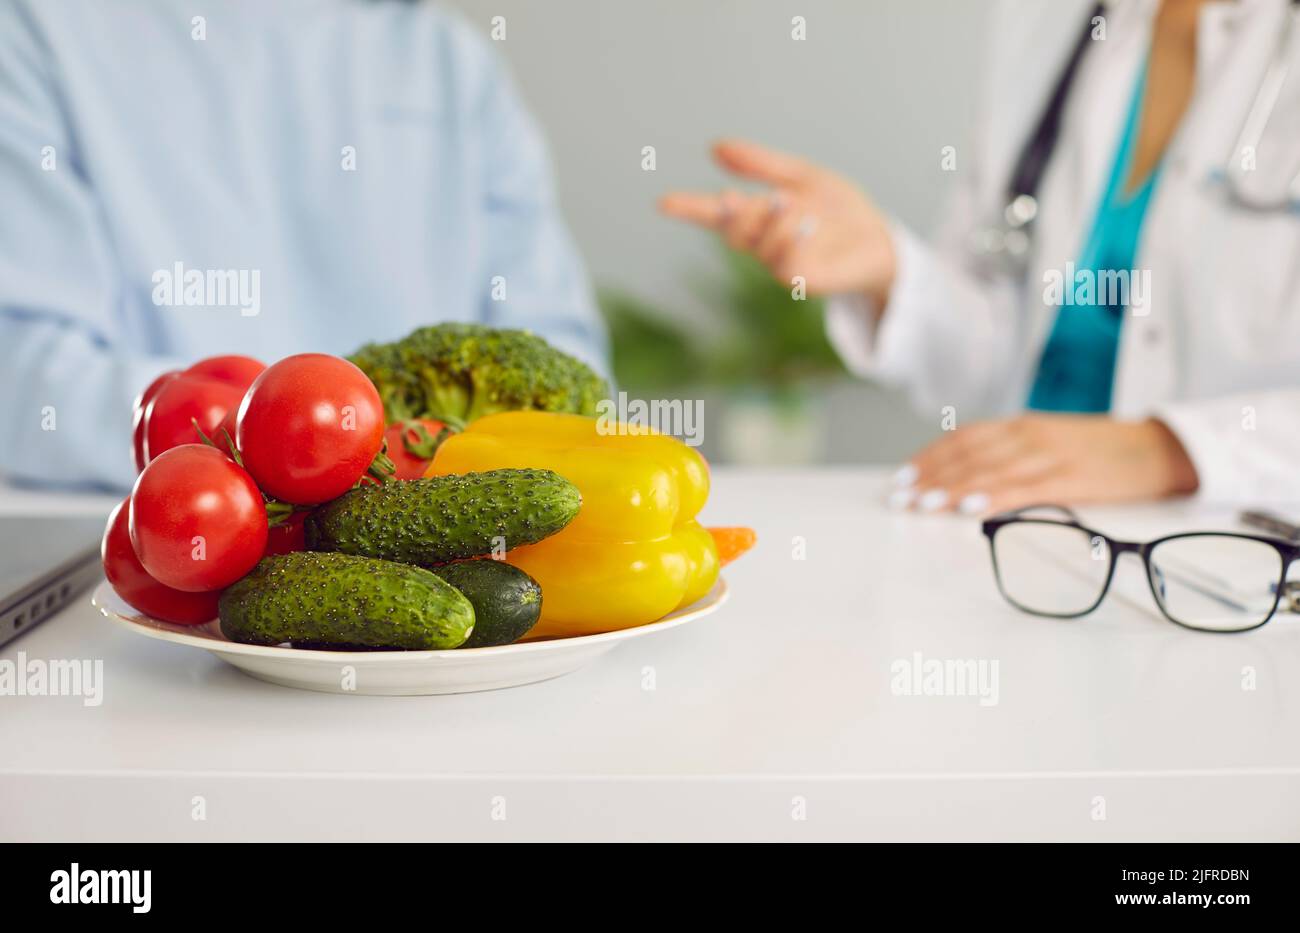 Vegetables on table of dietitian or nutritionist giving consultation to patient in background Stock Photo